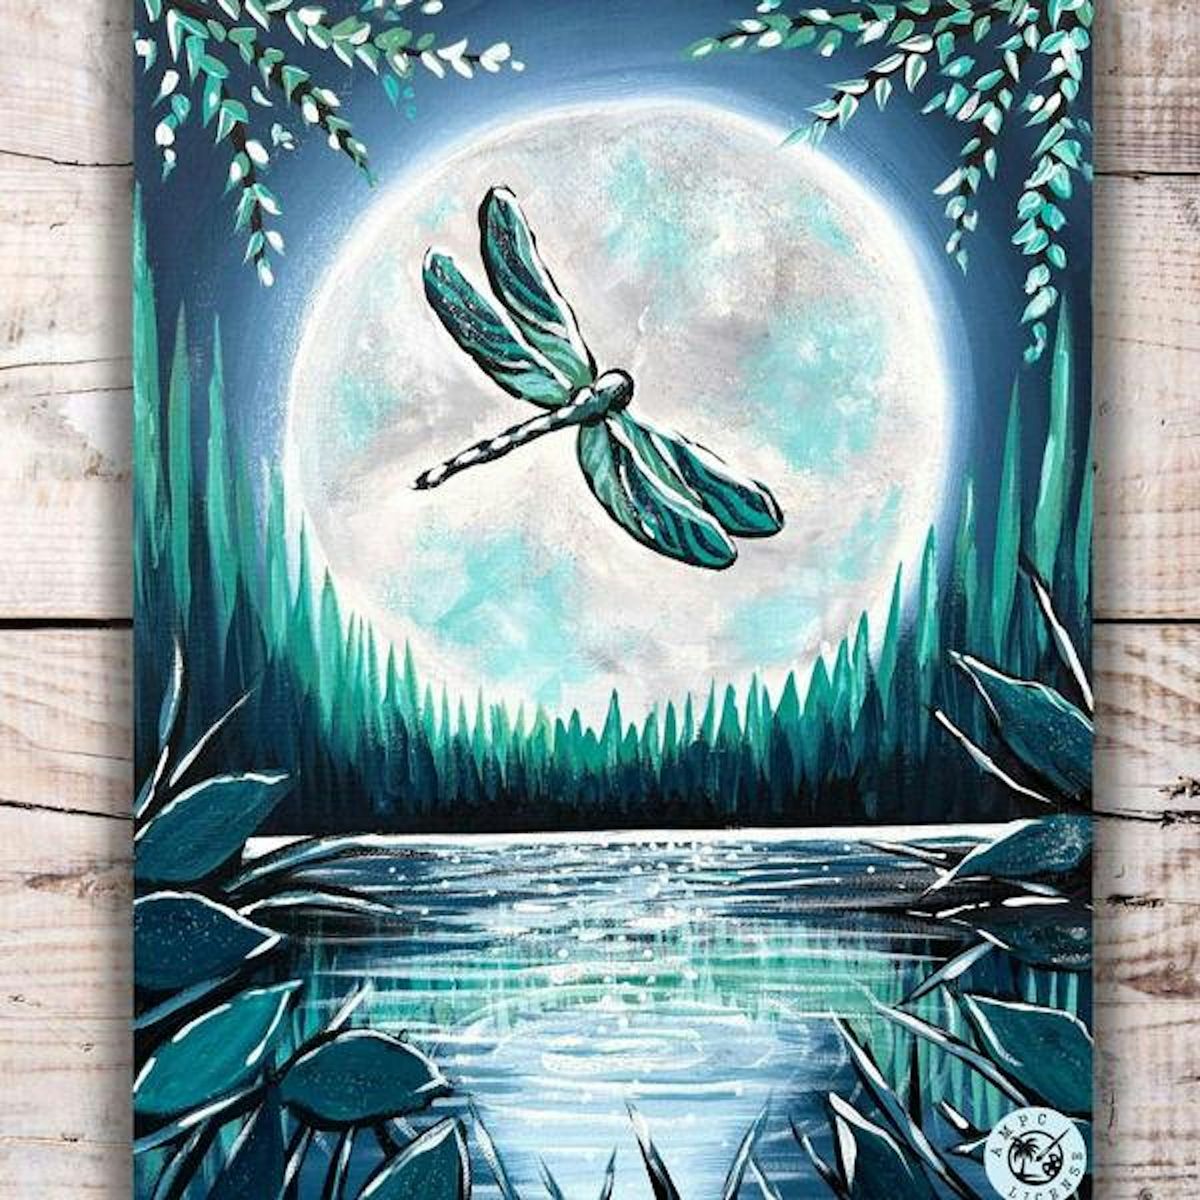 Discount Paint Night: Dragonfly in the Moonlight